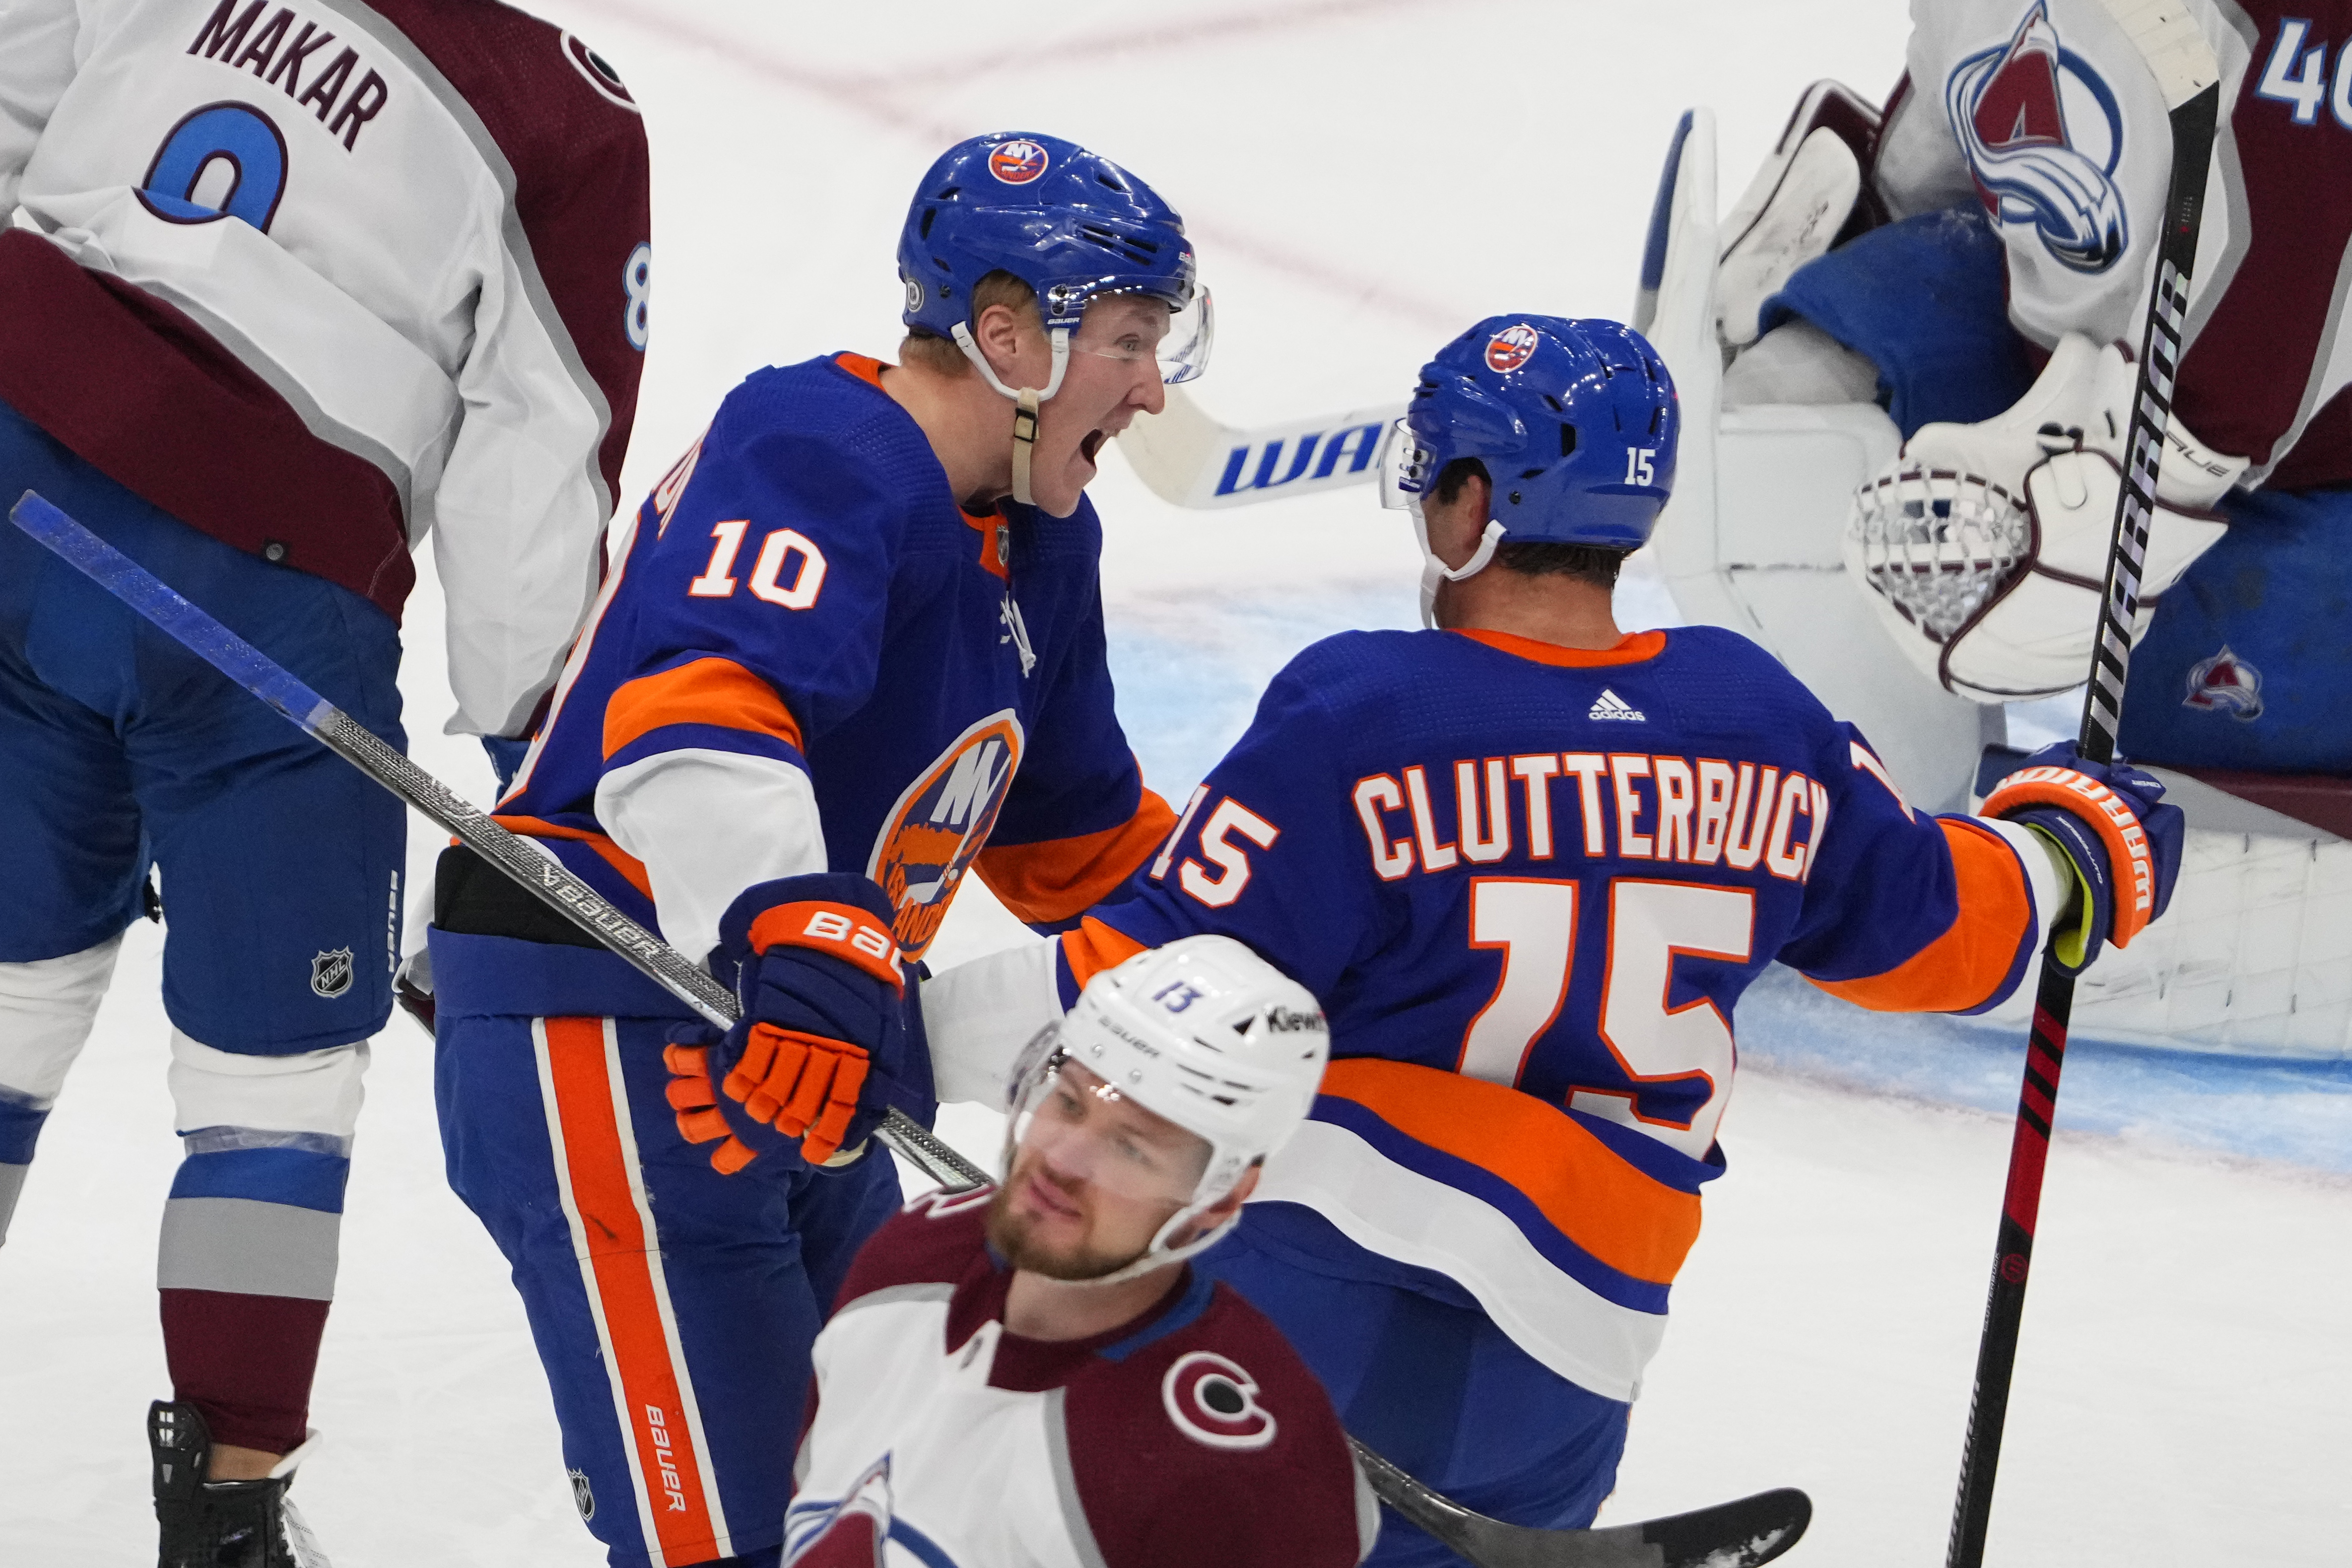 NHL: OCT 24 Avalanche at Islanders